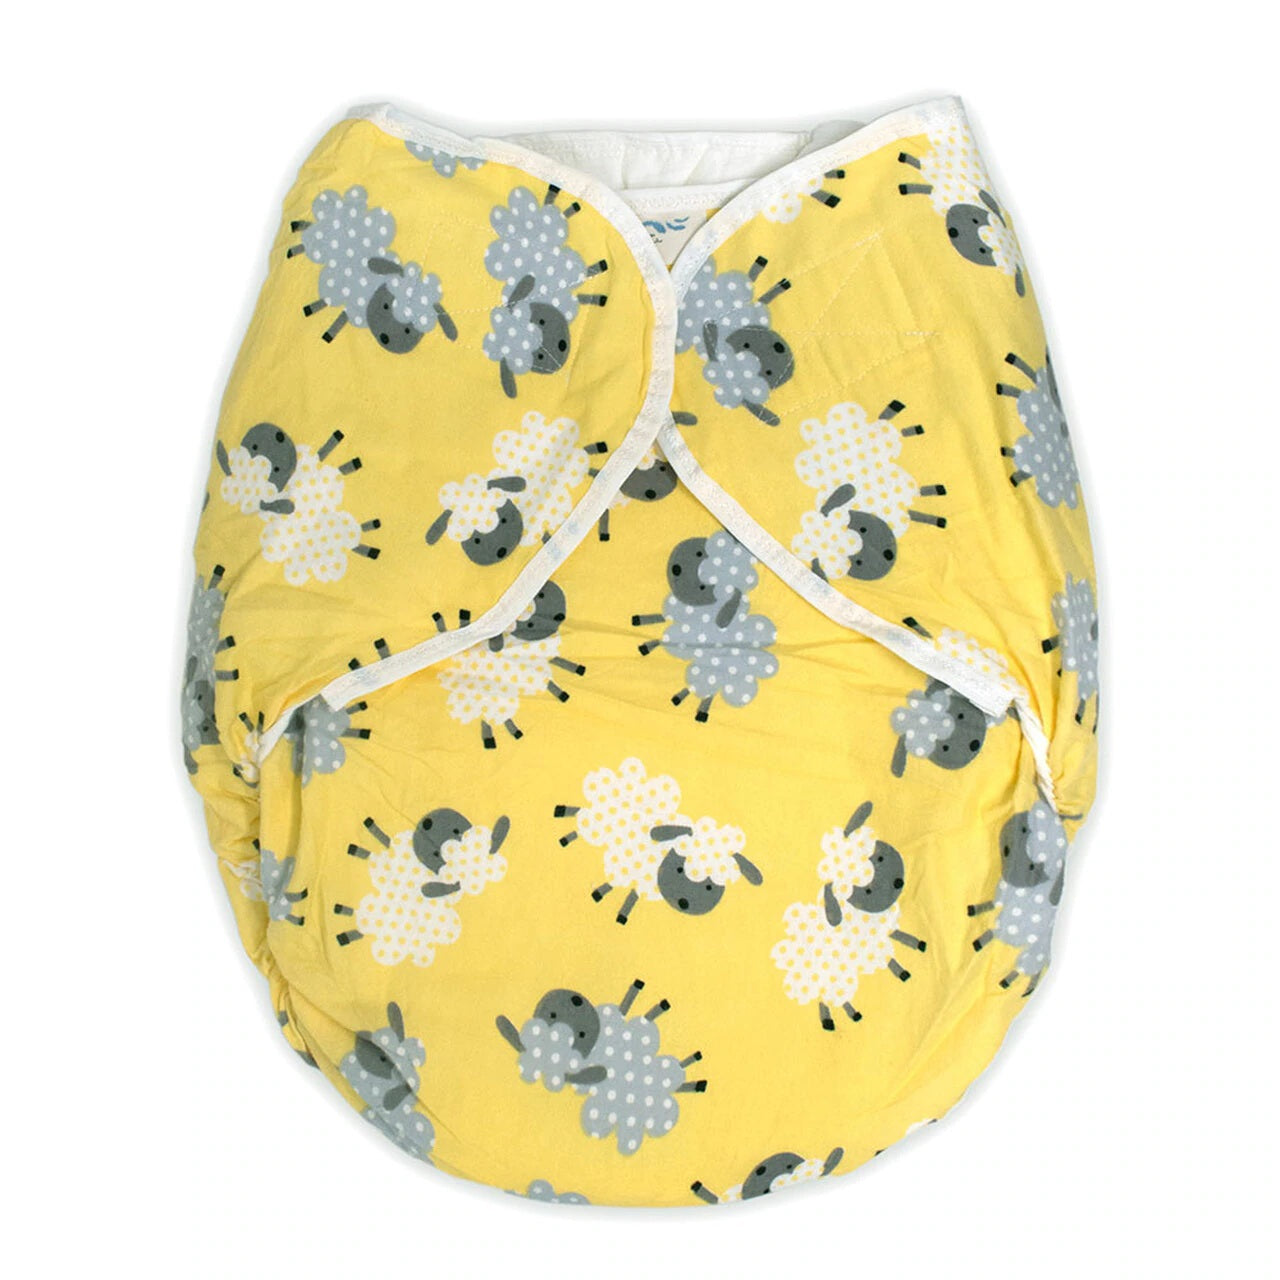 The yellow sheep Bulky Fitted Nighttime Cloth Diaper.